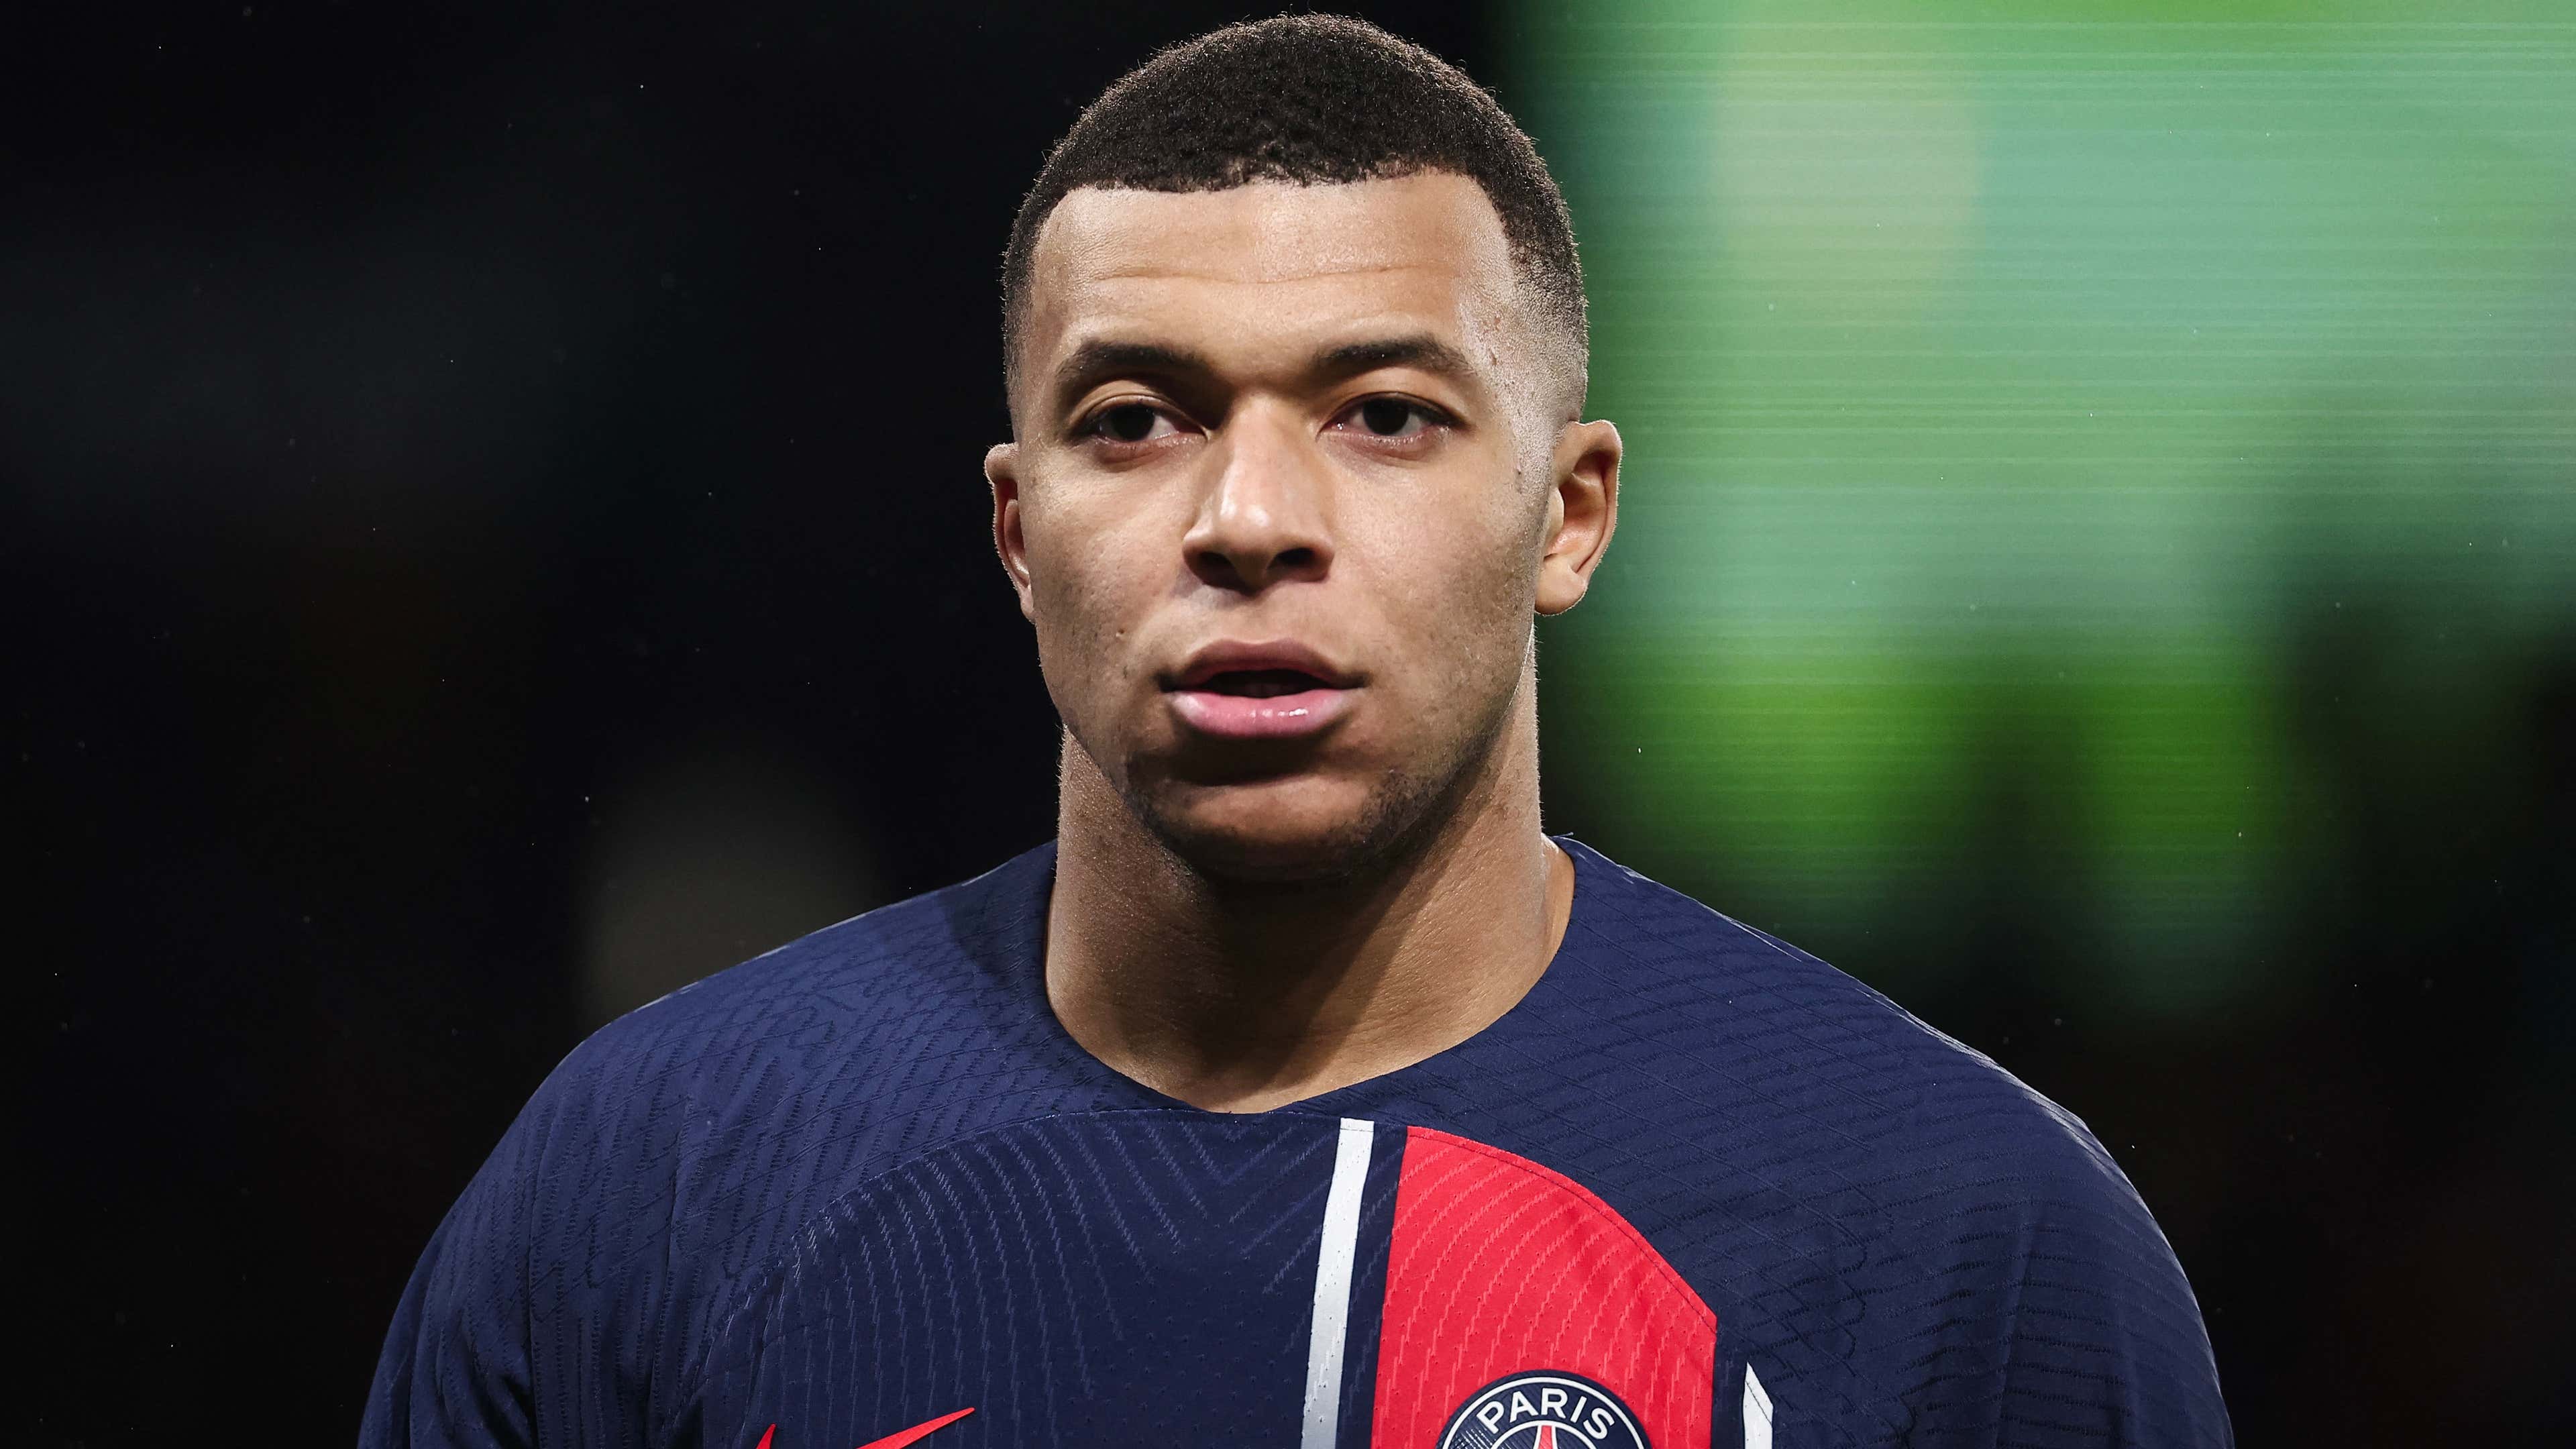 Revealed: Kylian Mbappe has 'many doubts' over Real Madrid